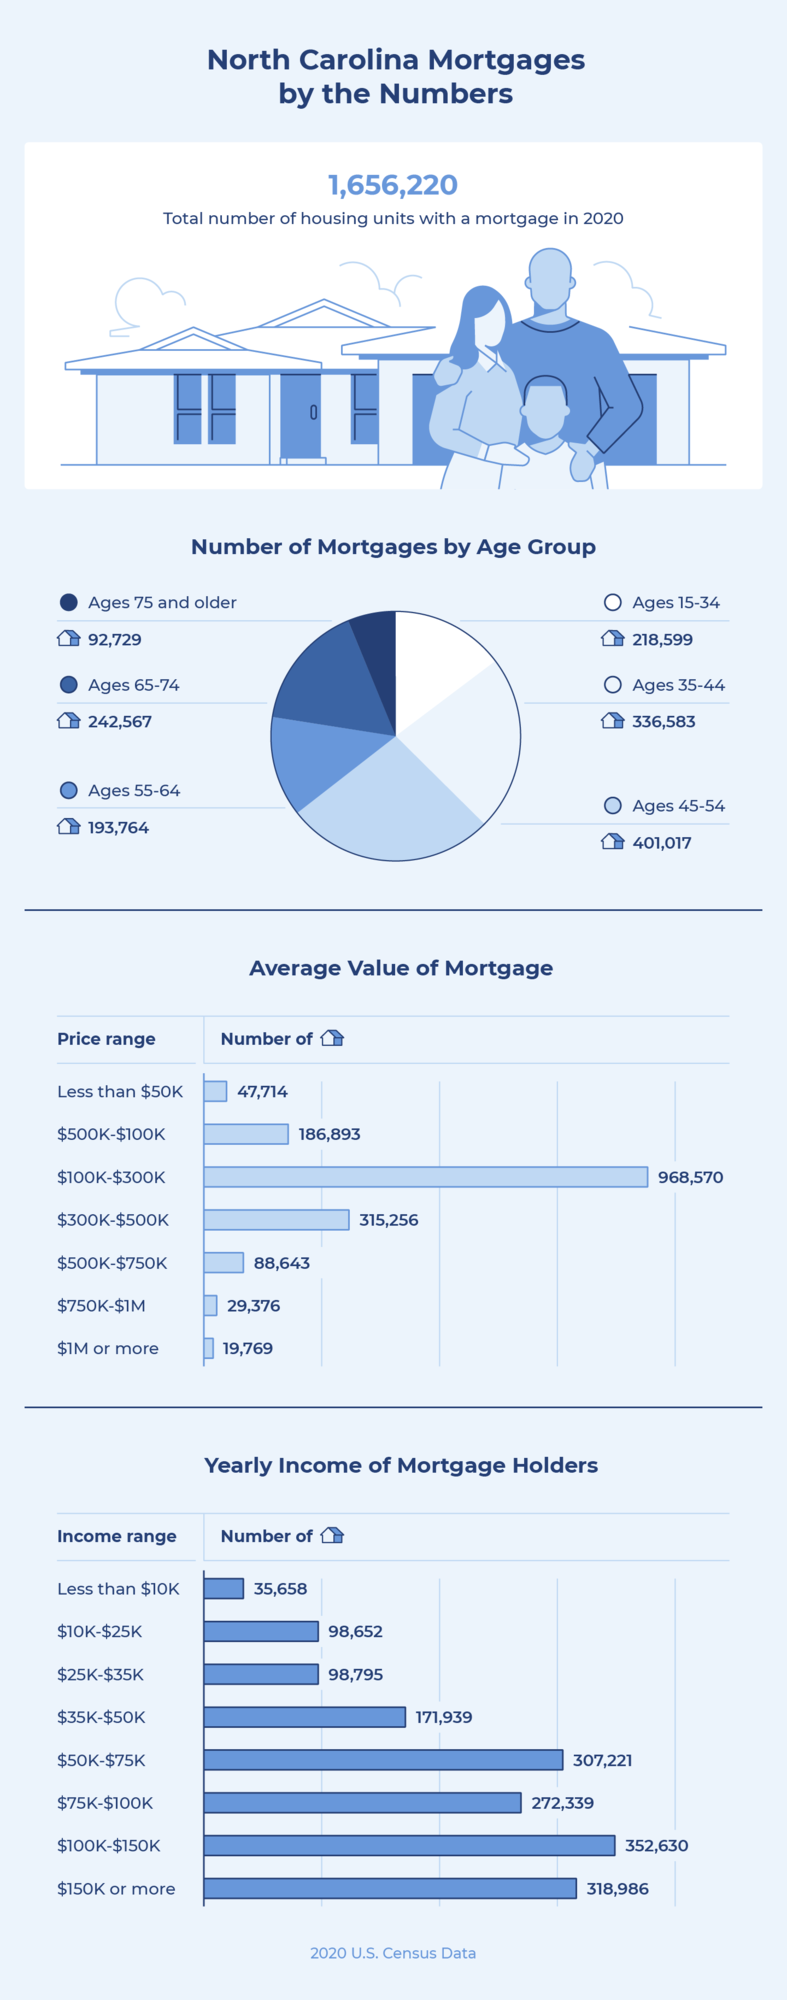 There were 1,656,220 homes with a mortgage in North Carolina in 2020. Most homes have a mortgage between $100,000 and $300,000.